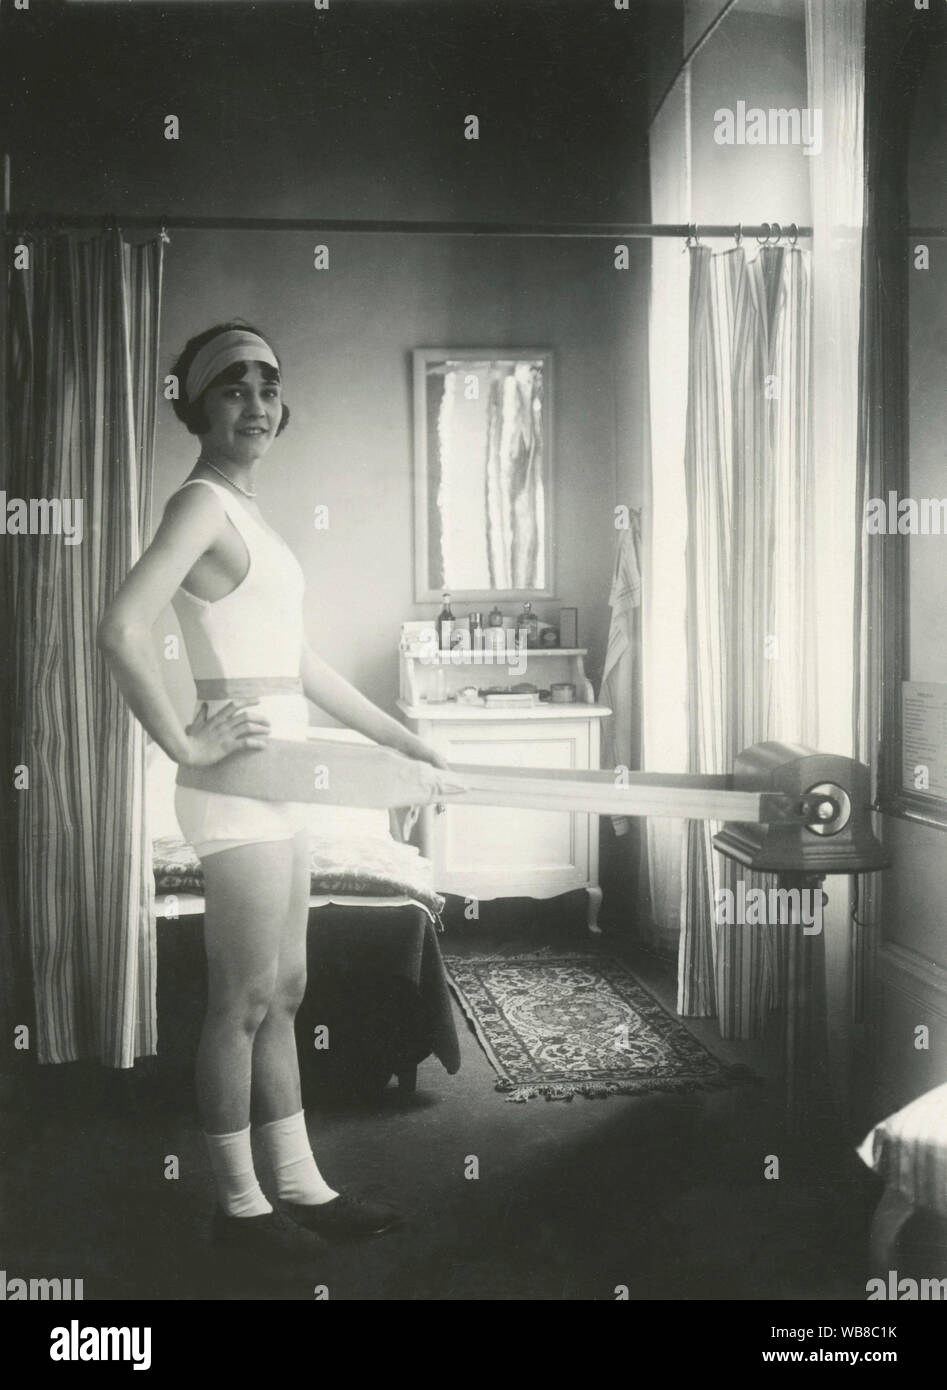 https://c8.alamy.com/comp/WB8C1K/massage-in-the-1930s-the-swedish-actress-disa-gillis-demonstrates-the-belt-massager-and-exercise-machine-that-is-designed-to-vibrate-and-massage-the-body-sweden-1930s-WB8C1K.jpg